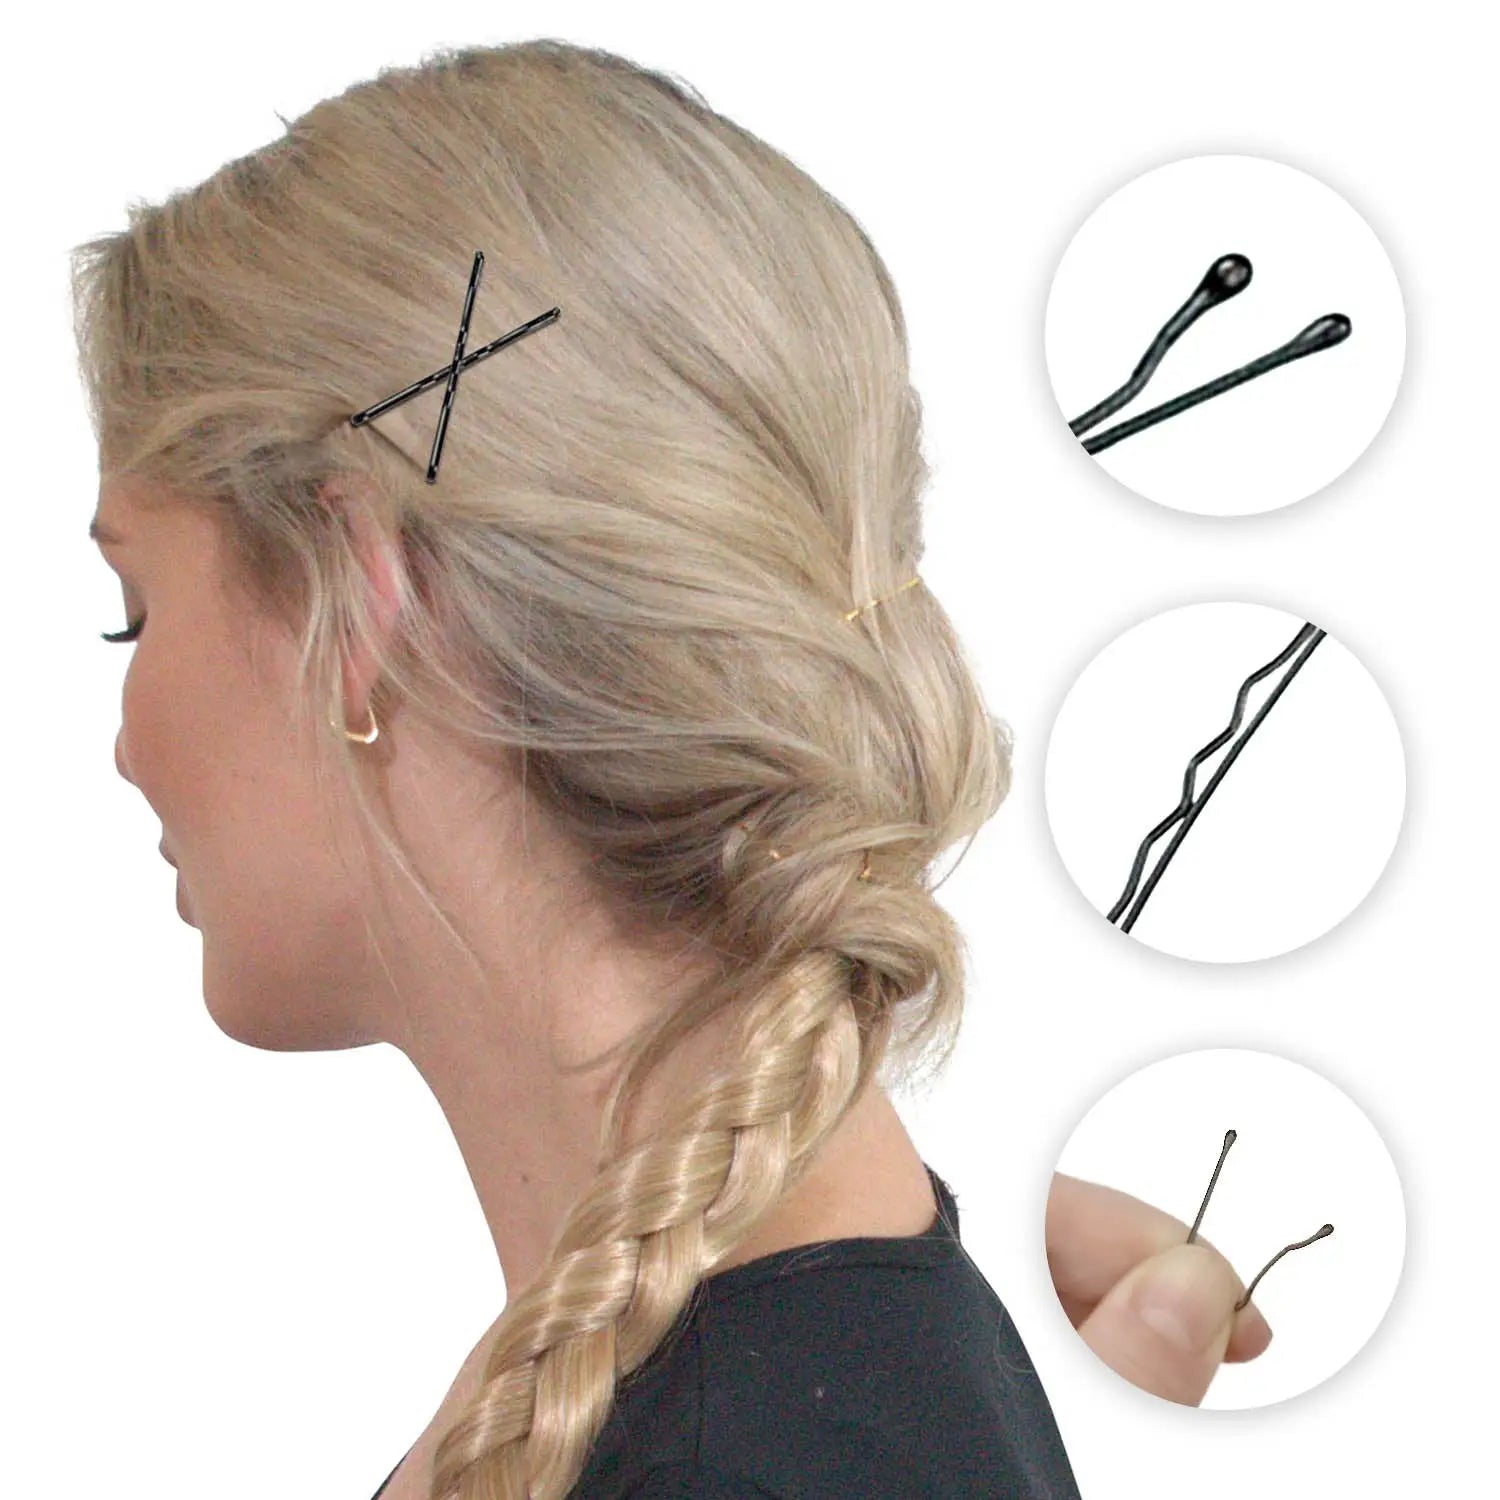 Metal bobby hair pins for styling and hold - woman with black hair clip and scissors